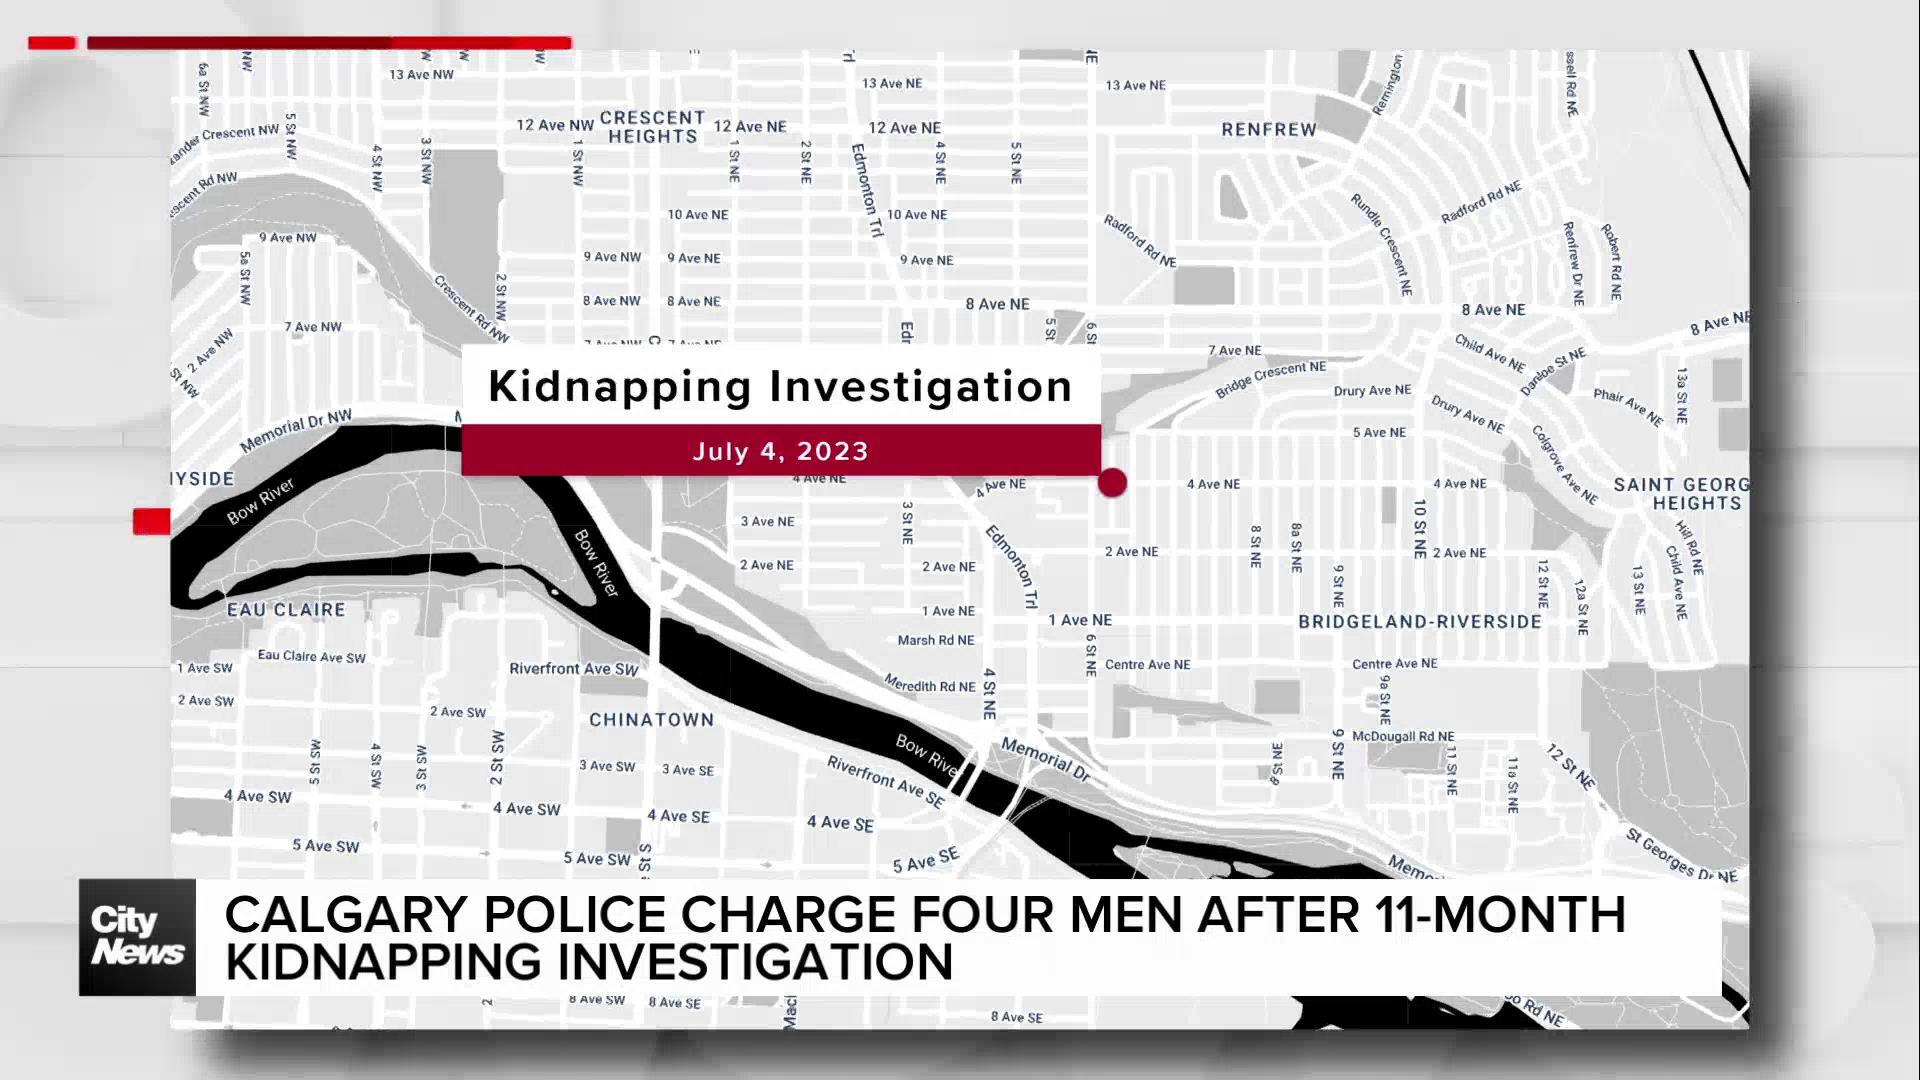 Calgary Police charge four men after 11-month kidnapping investigation